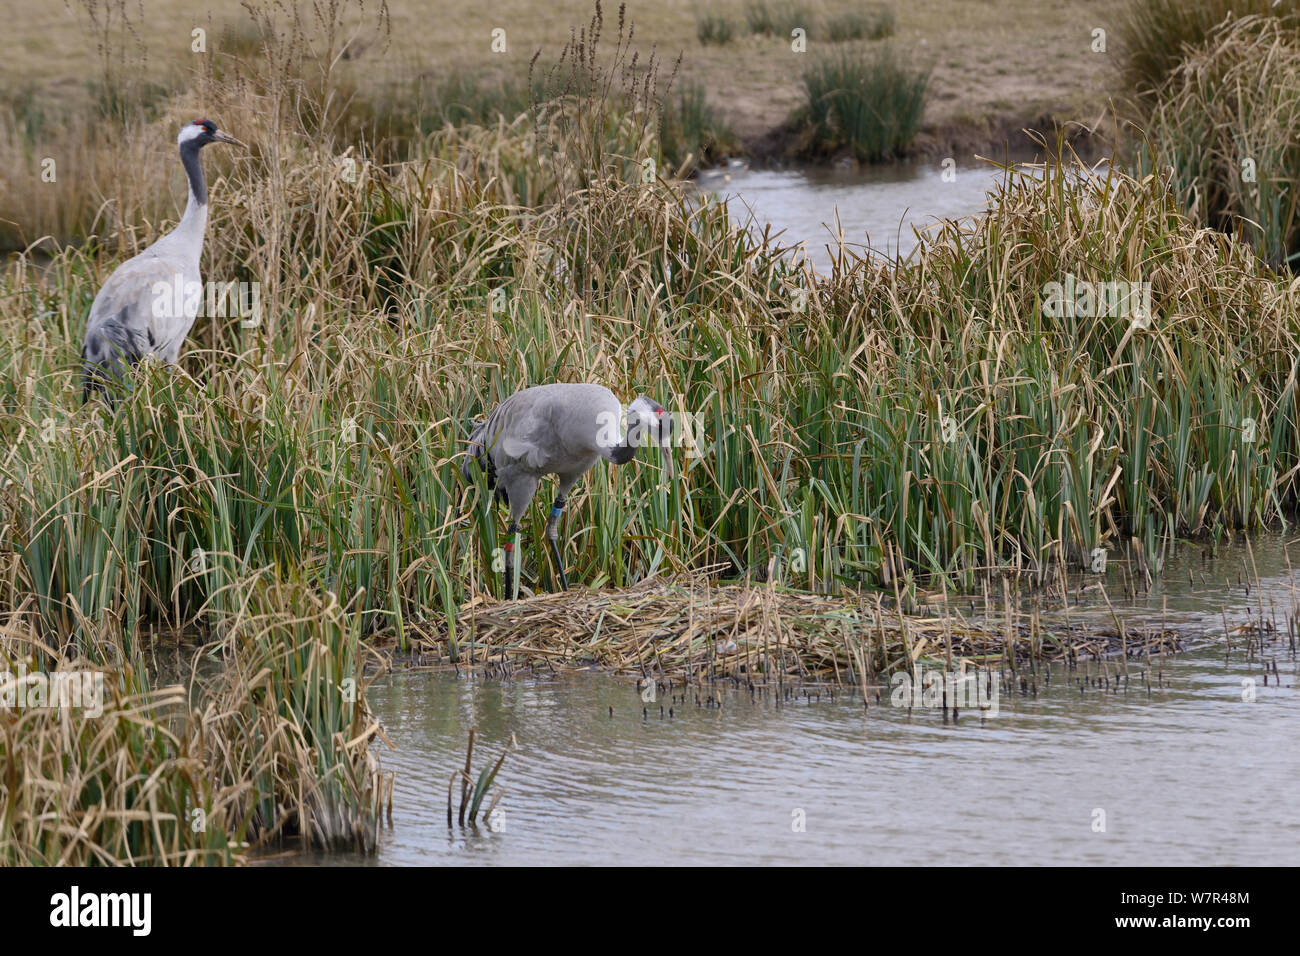 Three year old Common / Eurasian crane (Grus grus) pair 'Chris' and 'Monty' released by the Great Crane Project inspecting a nest they built in flooded marshland, Slimbridge, Gloucestershire, UK, April 2013. Stock Photo